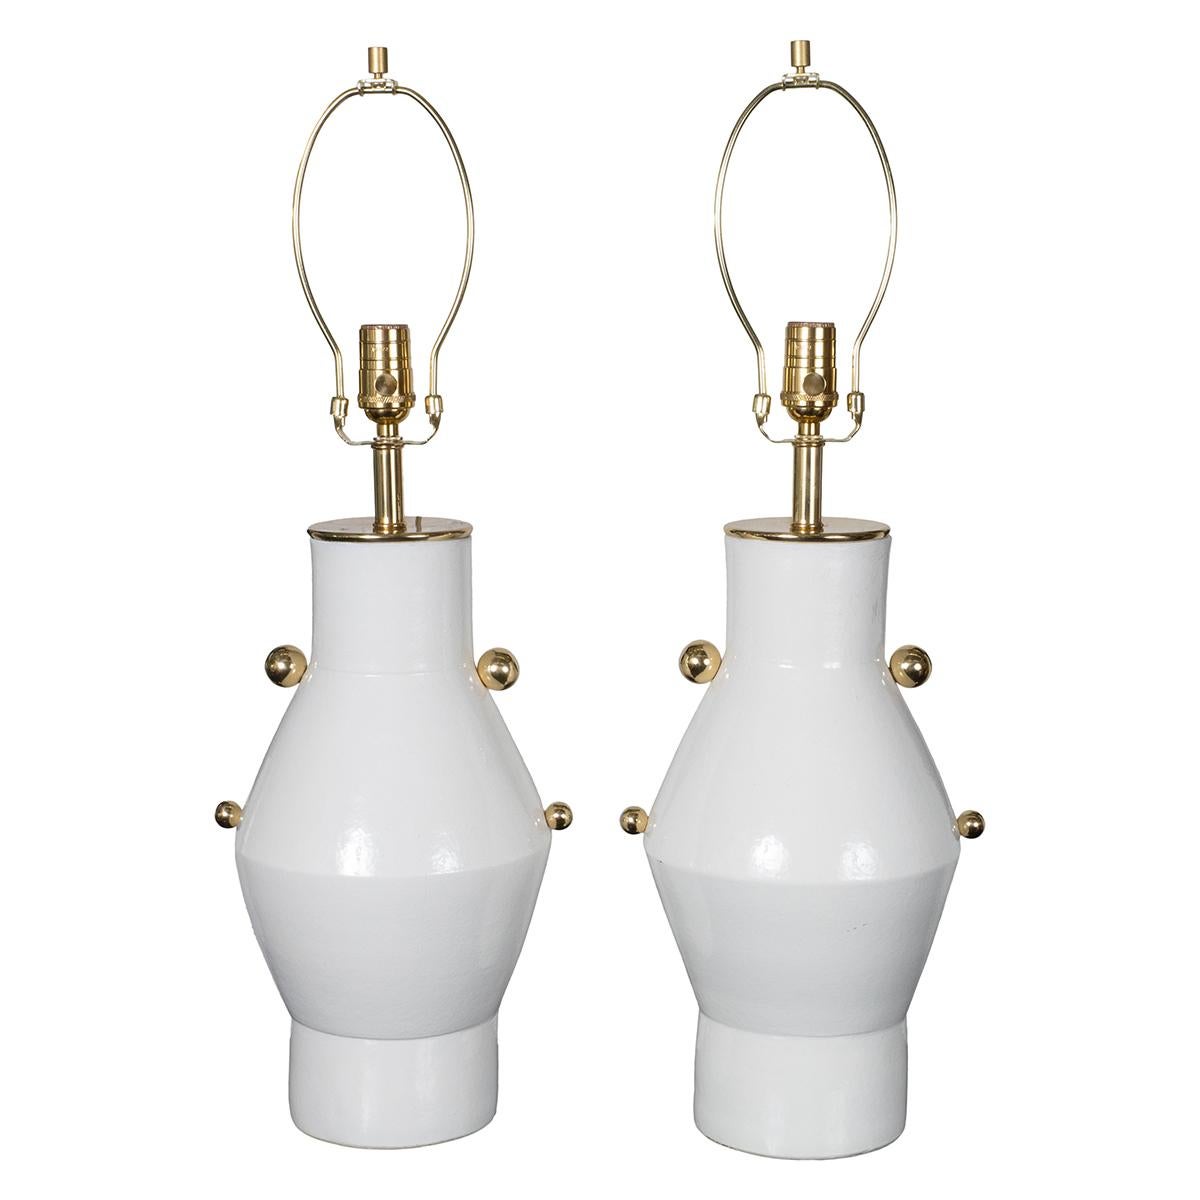 Pair of glazed ceramic vessel table lamps with brass ball details.